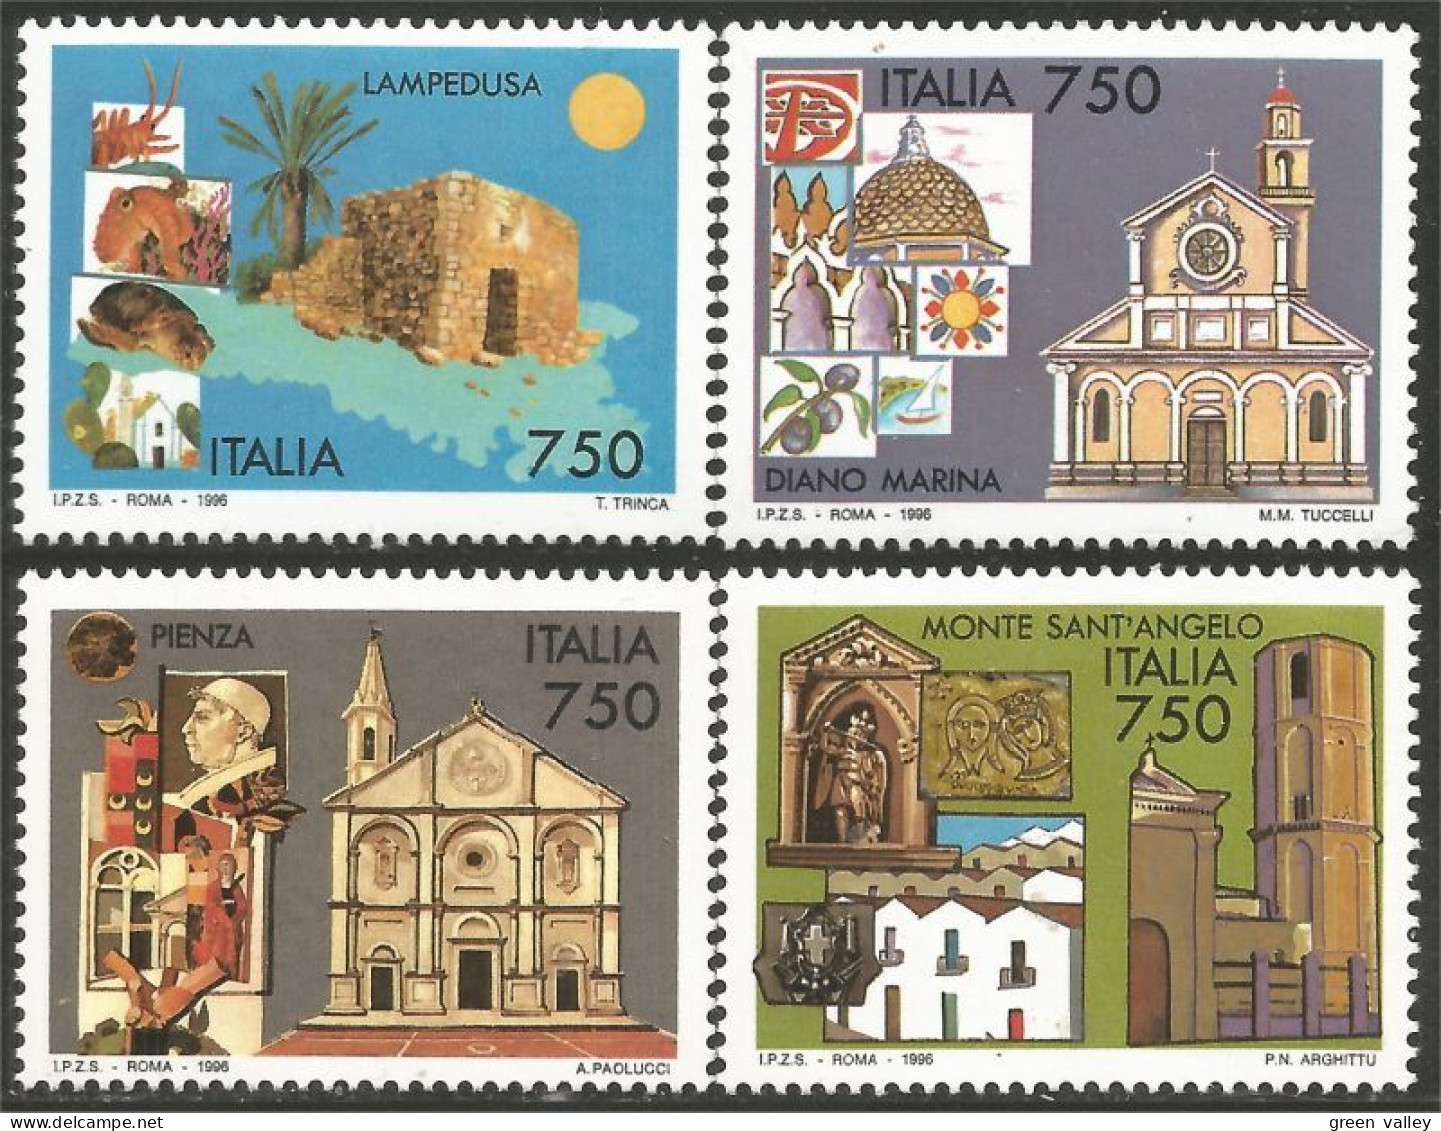 520 Italy Tourisme 1996 Cathédrales Pienza Anthony Belltower Cathedrals MNH ** Neuf SC (ITA-229b) - Abbayes & Monastères